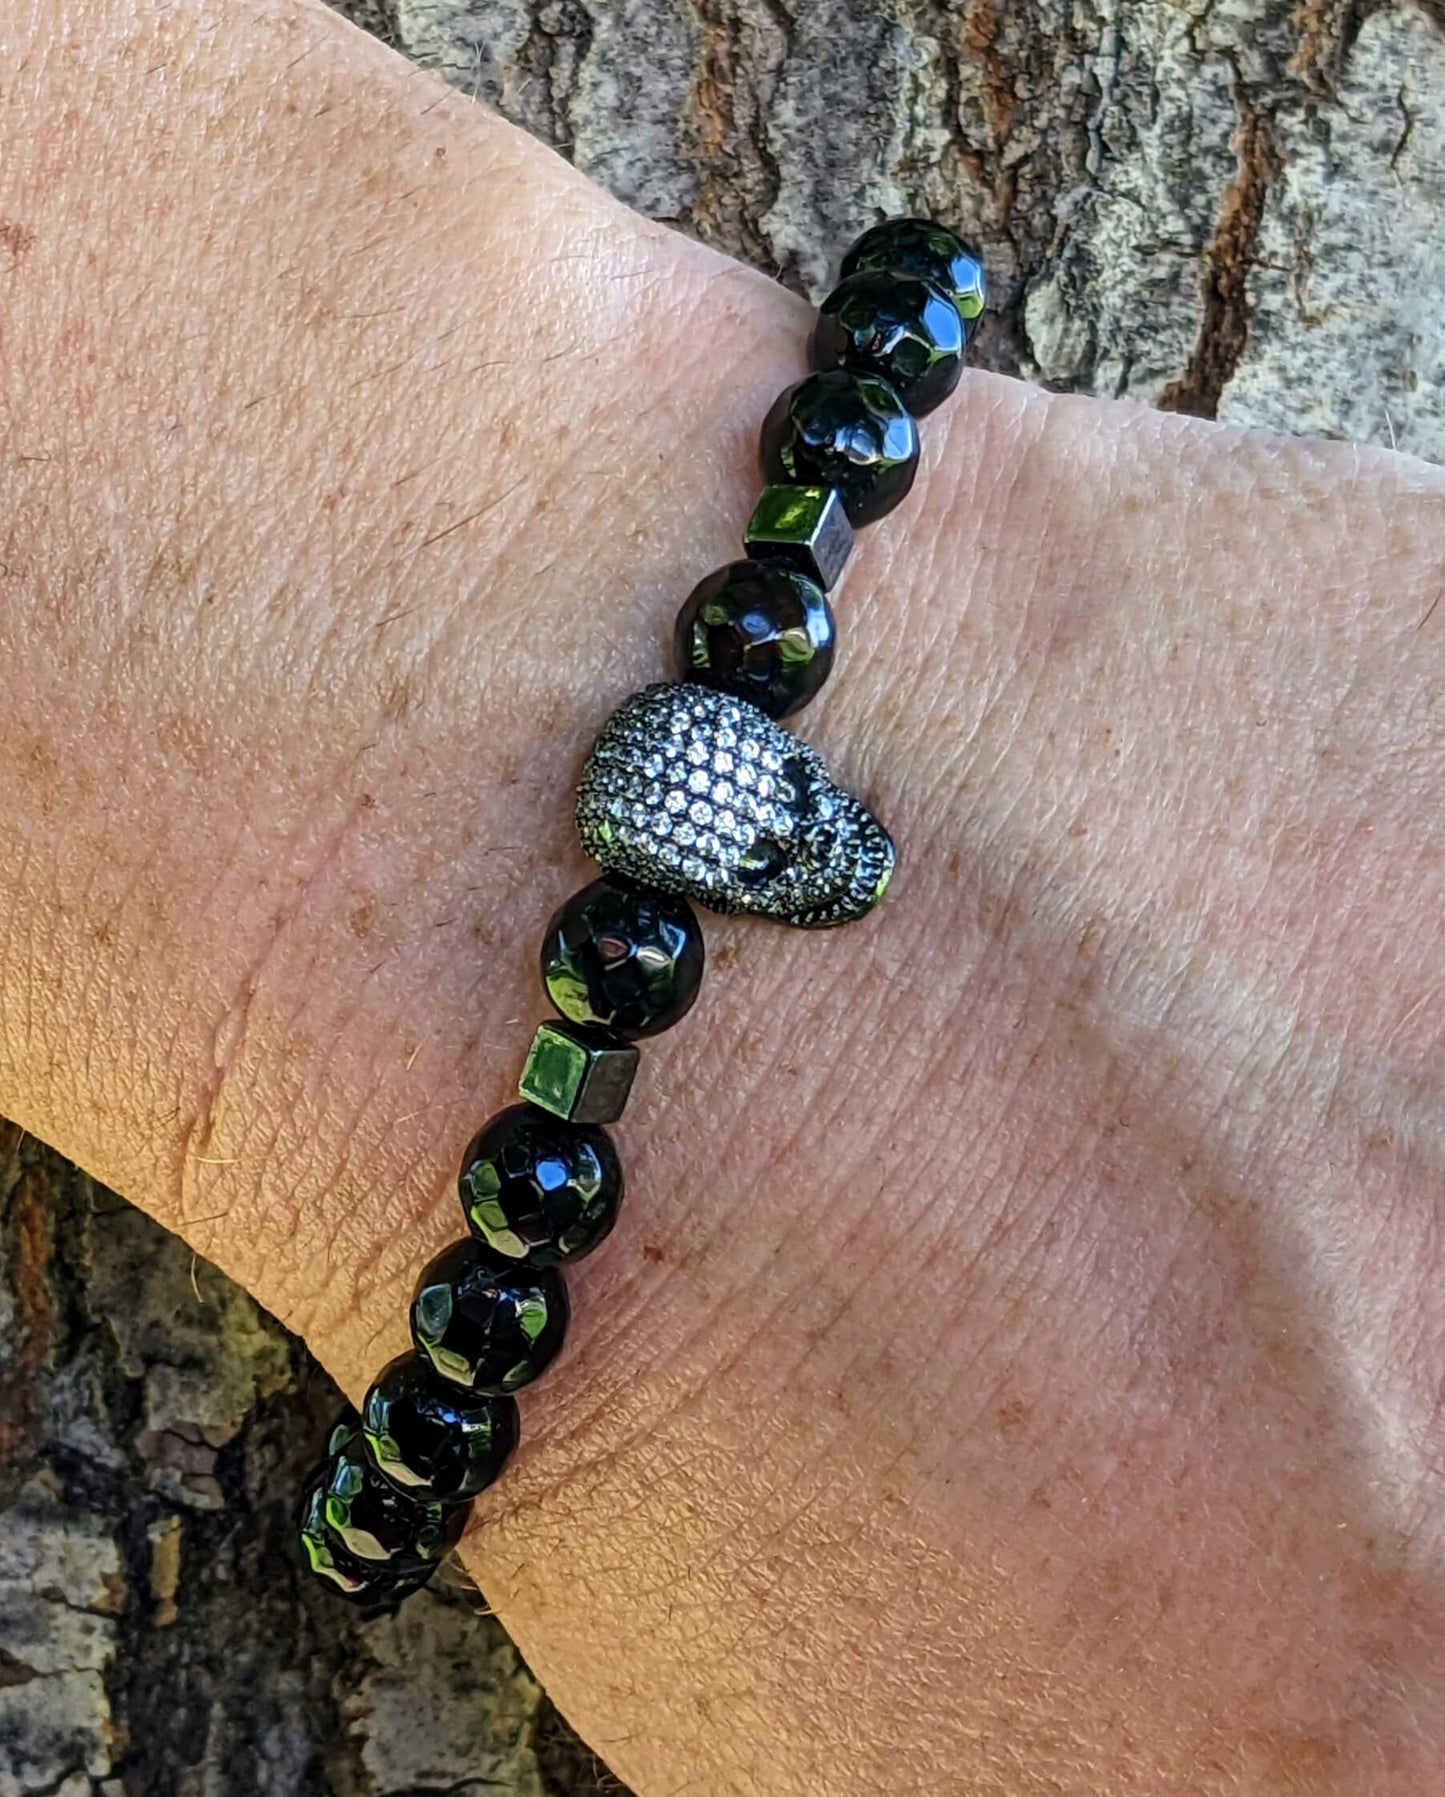 Black Skull with Black Agate and Hematite Spacers